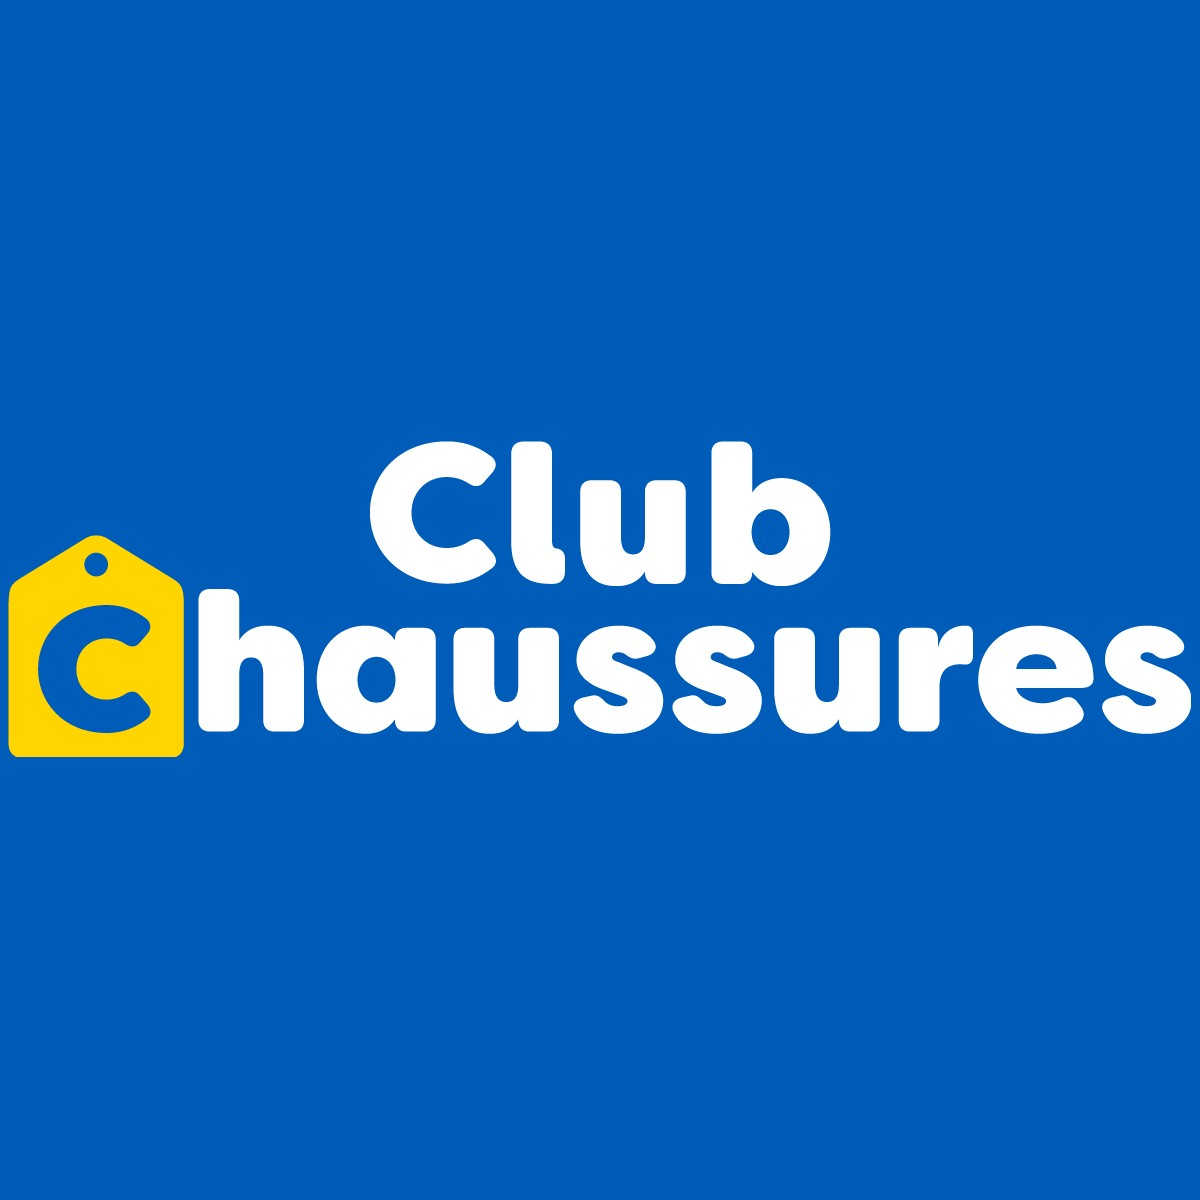 Annuaire Club Chaussures